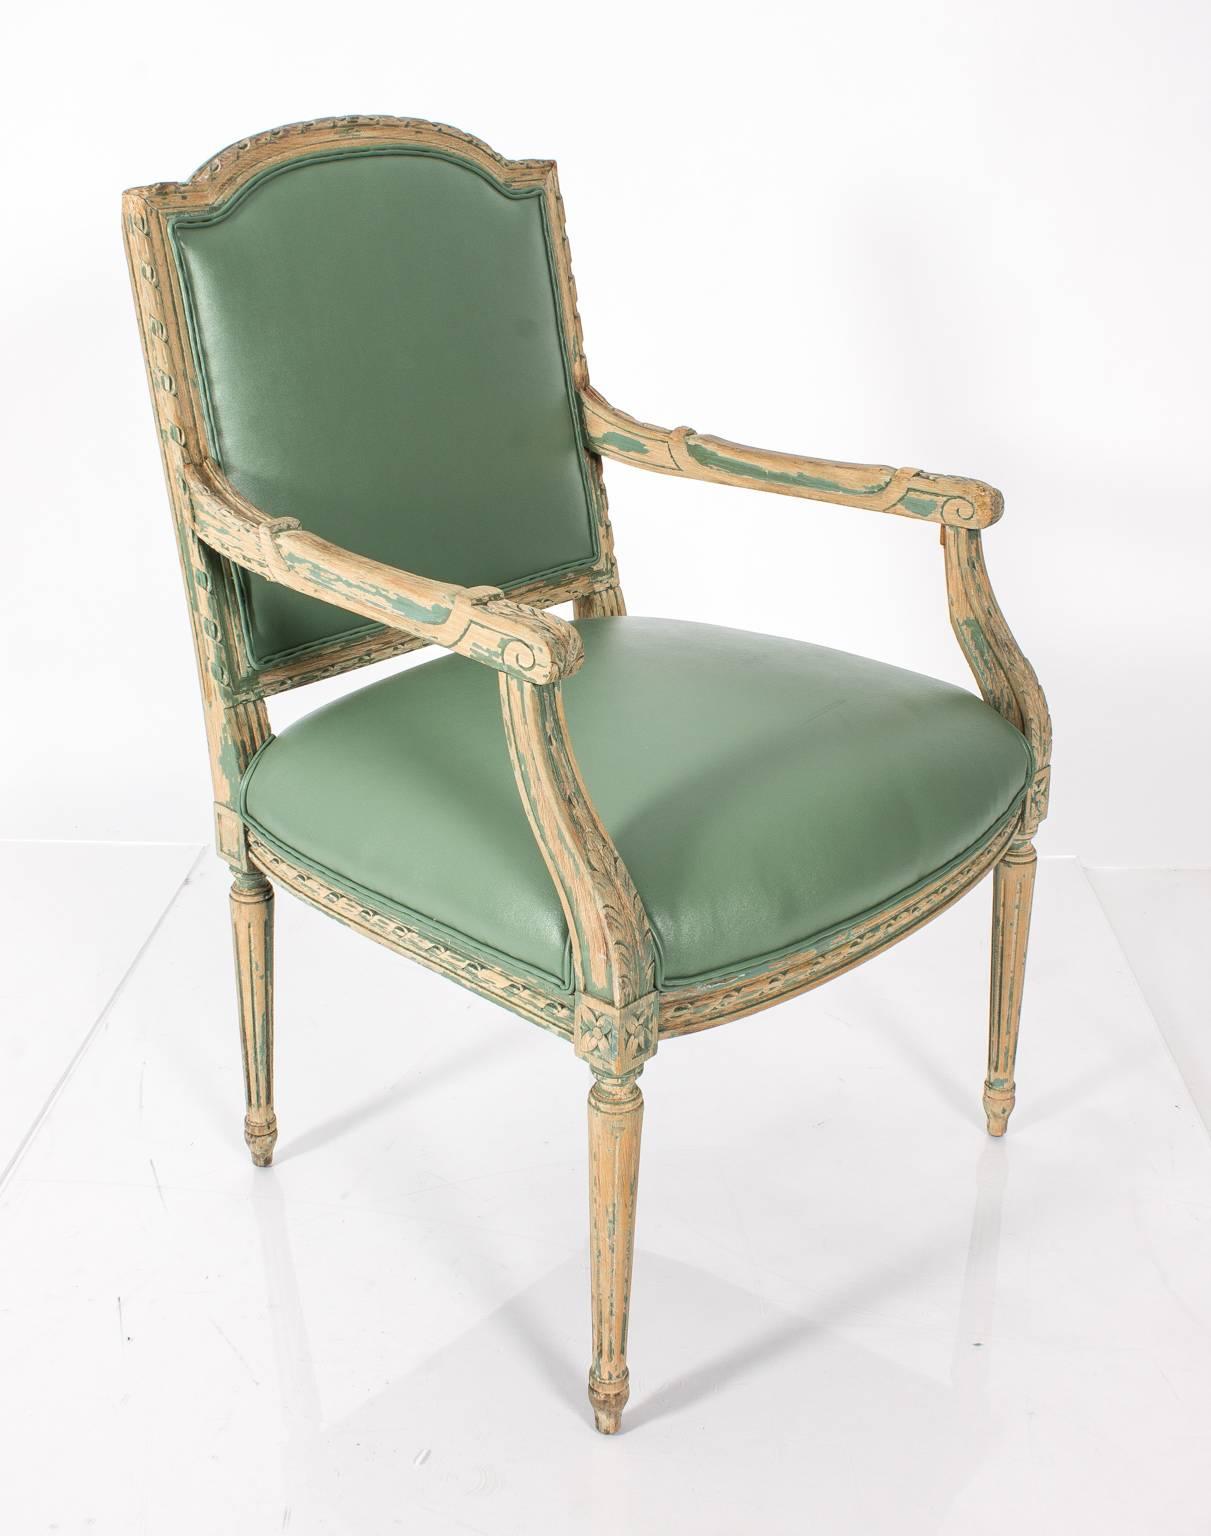 French Provincial Pair of Mint Green Leather Chairs